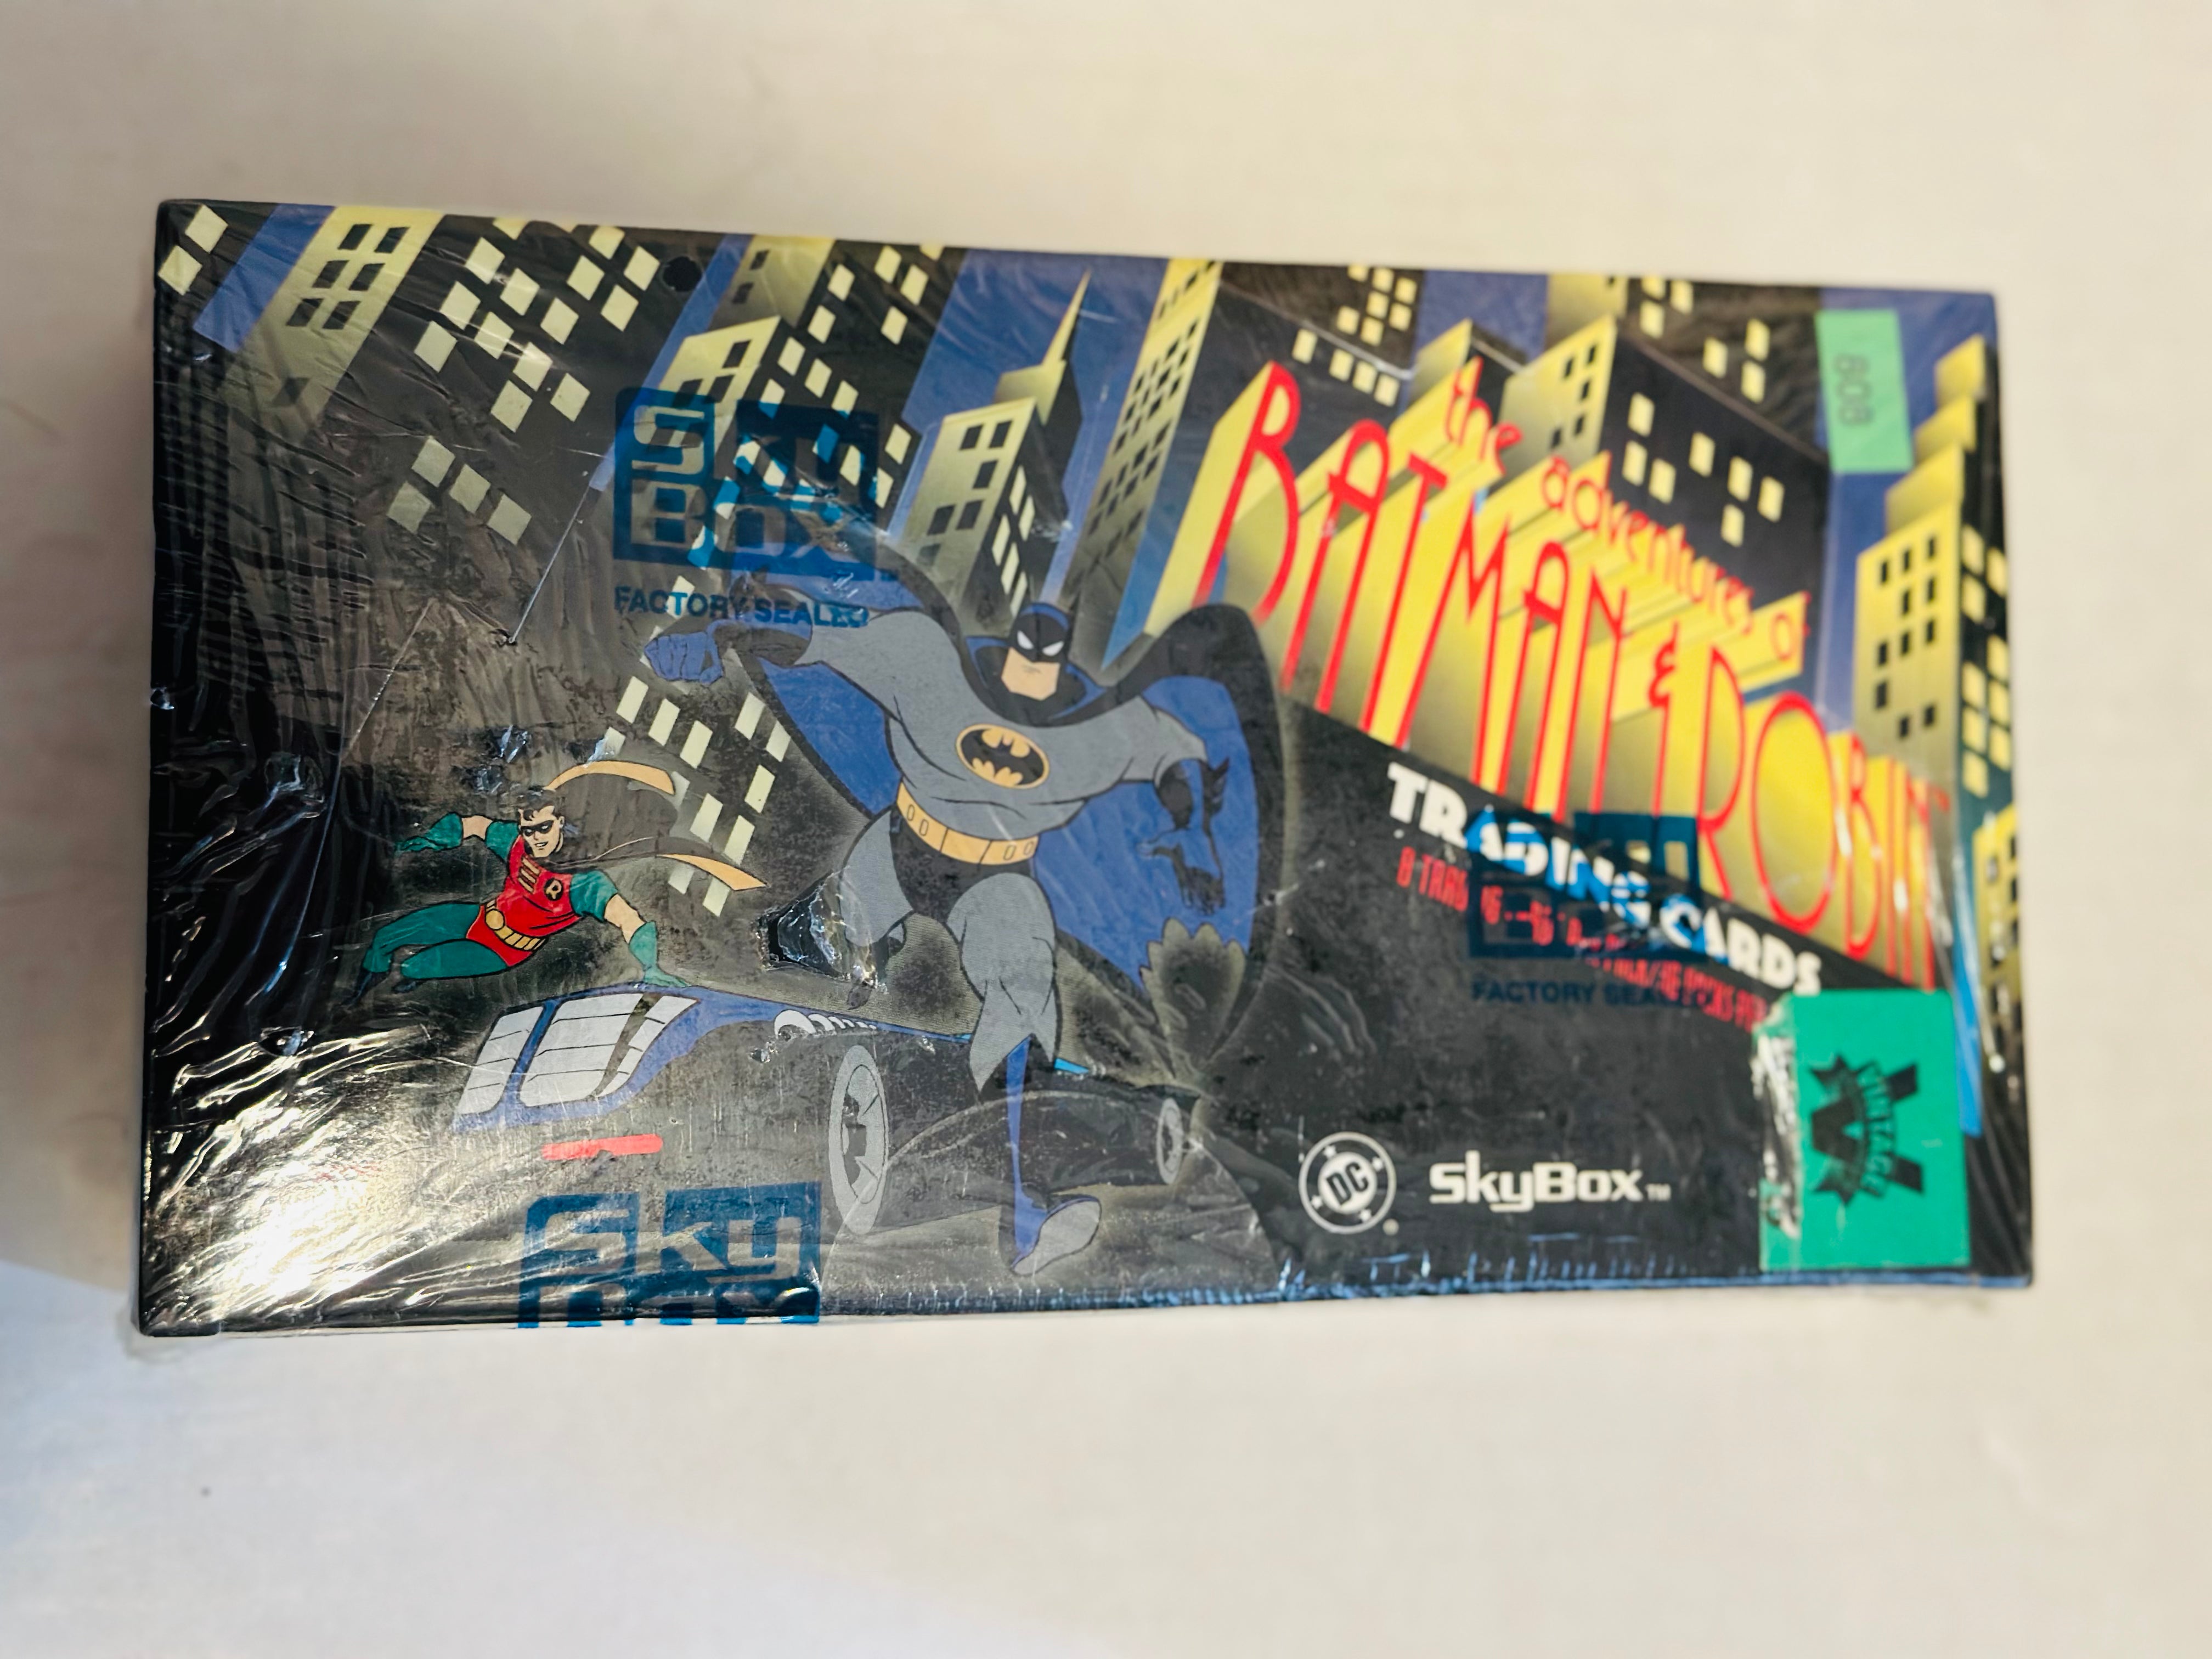 Adventures of Batman and Robin, animated 36 packs cards, factory sale, Box, 1995.